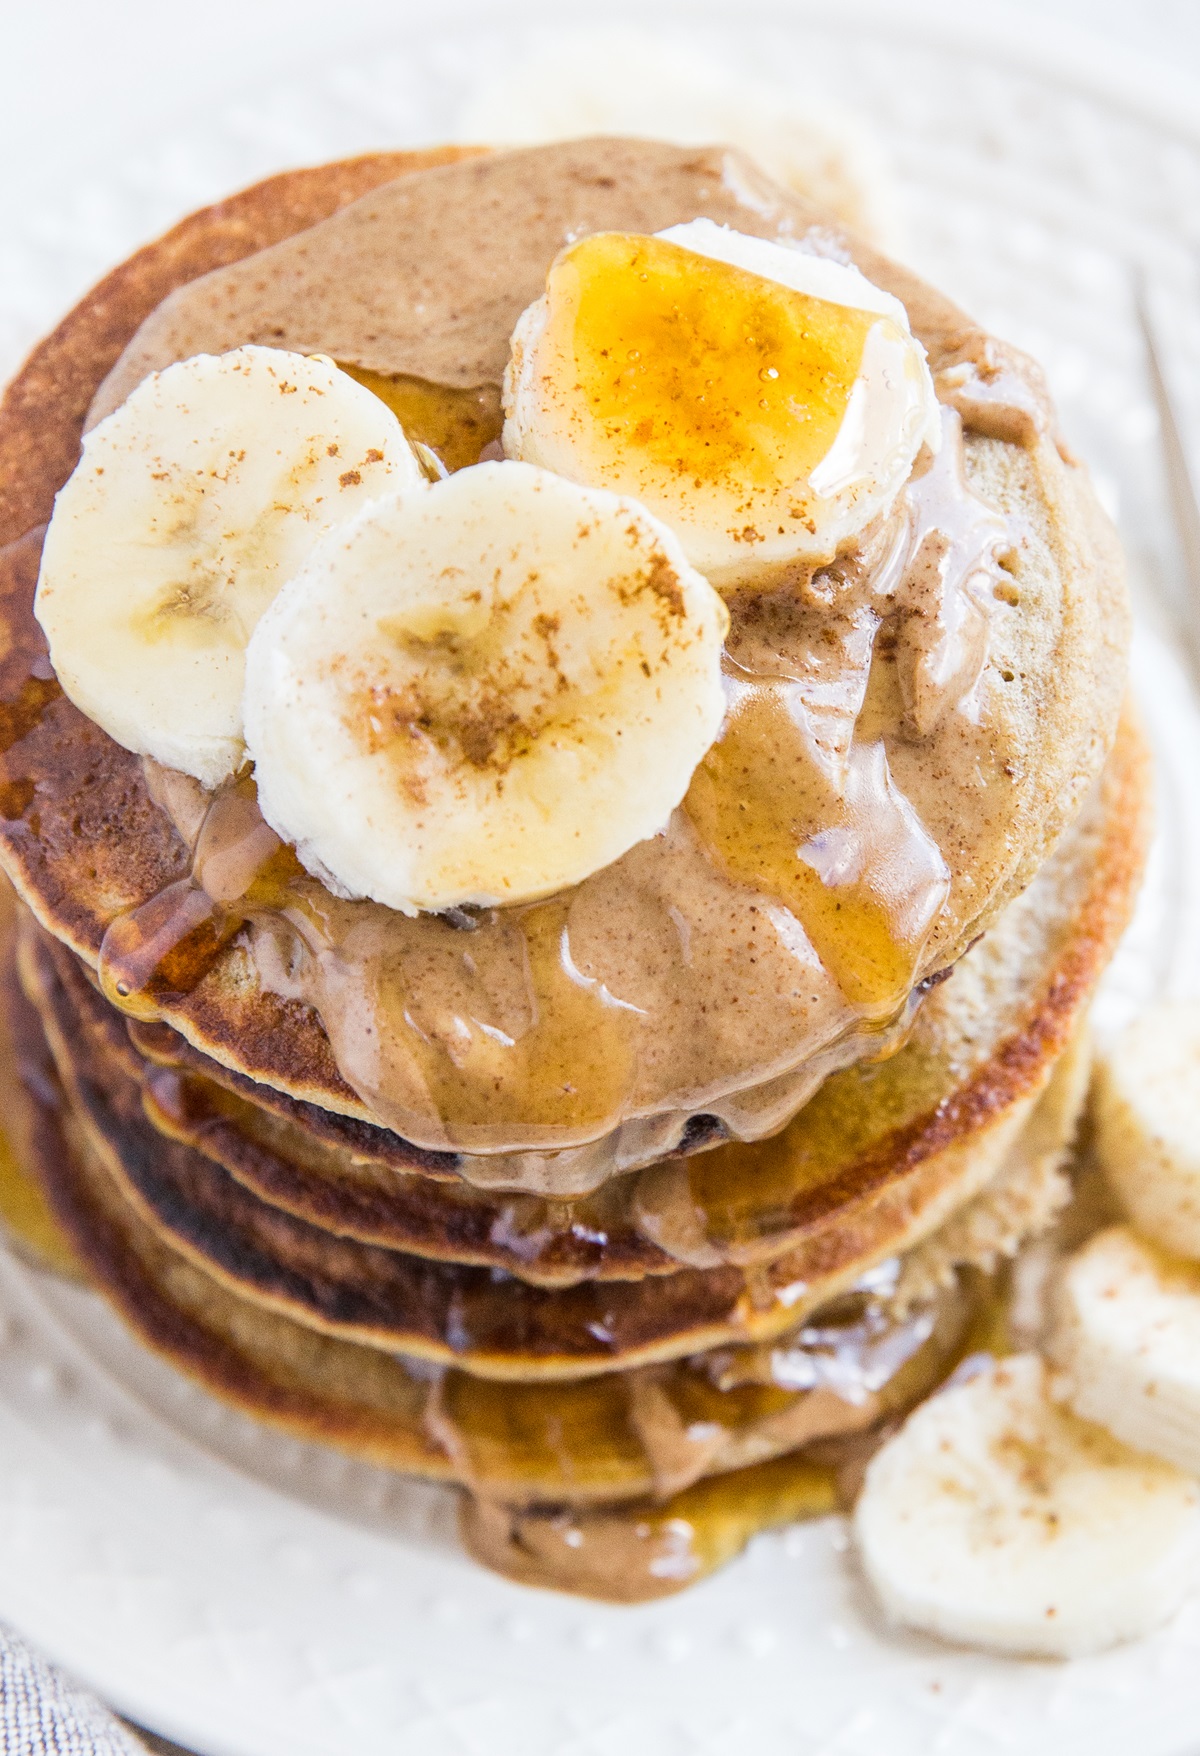 Gluten-Free Oatmeal Banana Pancakes made flourless using quick oats. These easy blender pancakes are dairy-free, fluffy, and healthy